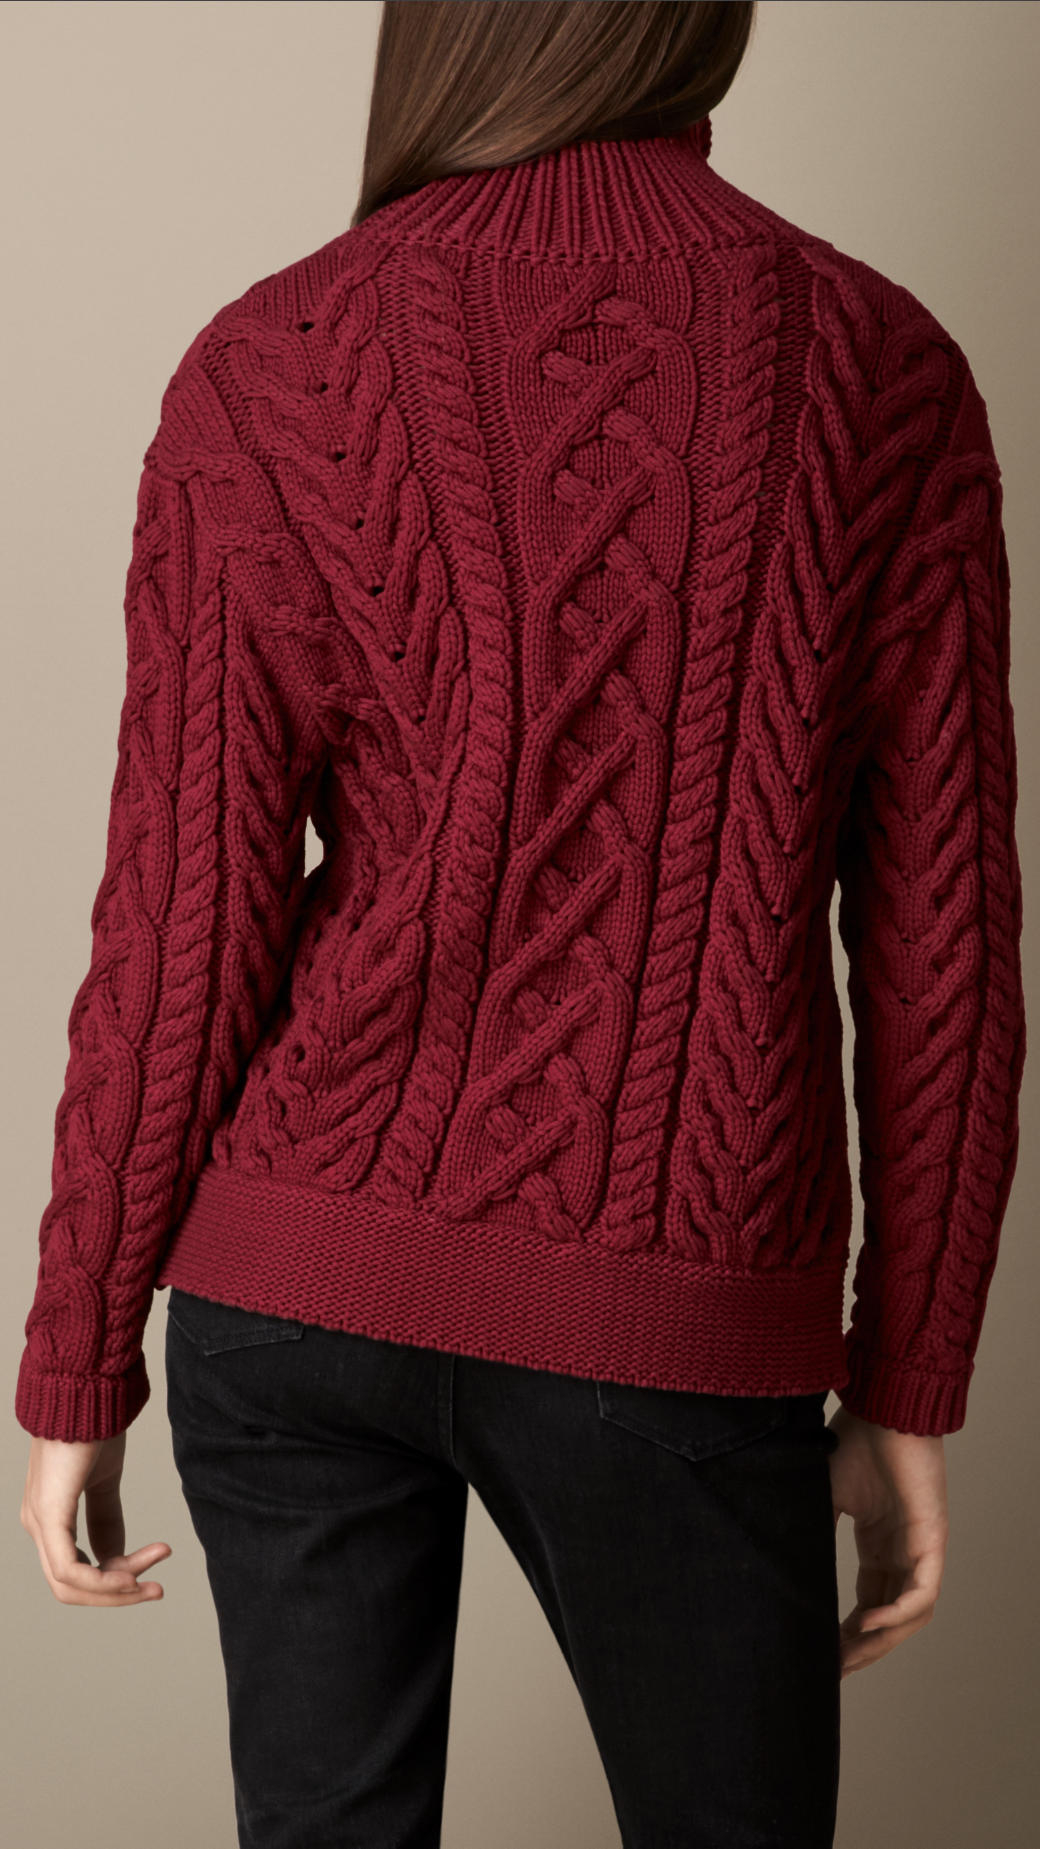 Lyst - Burberry Cable Knit Turtleneck Sweater in Red